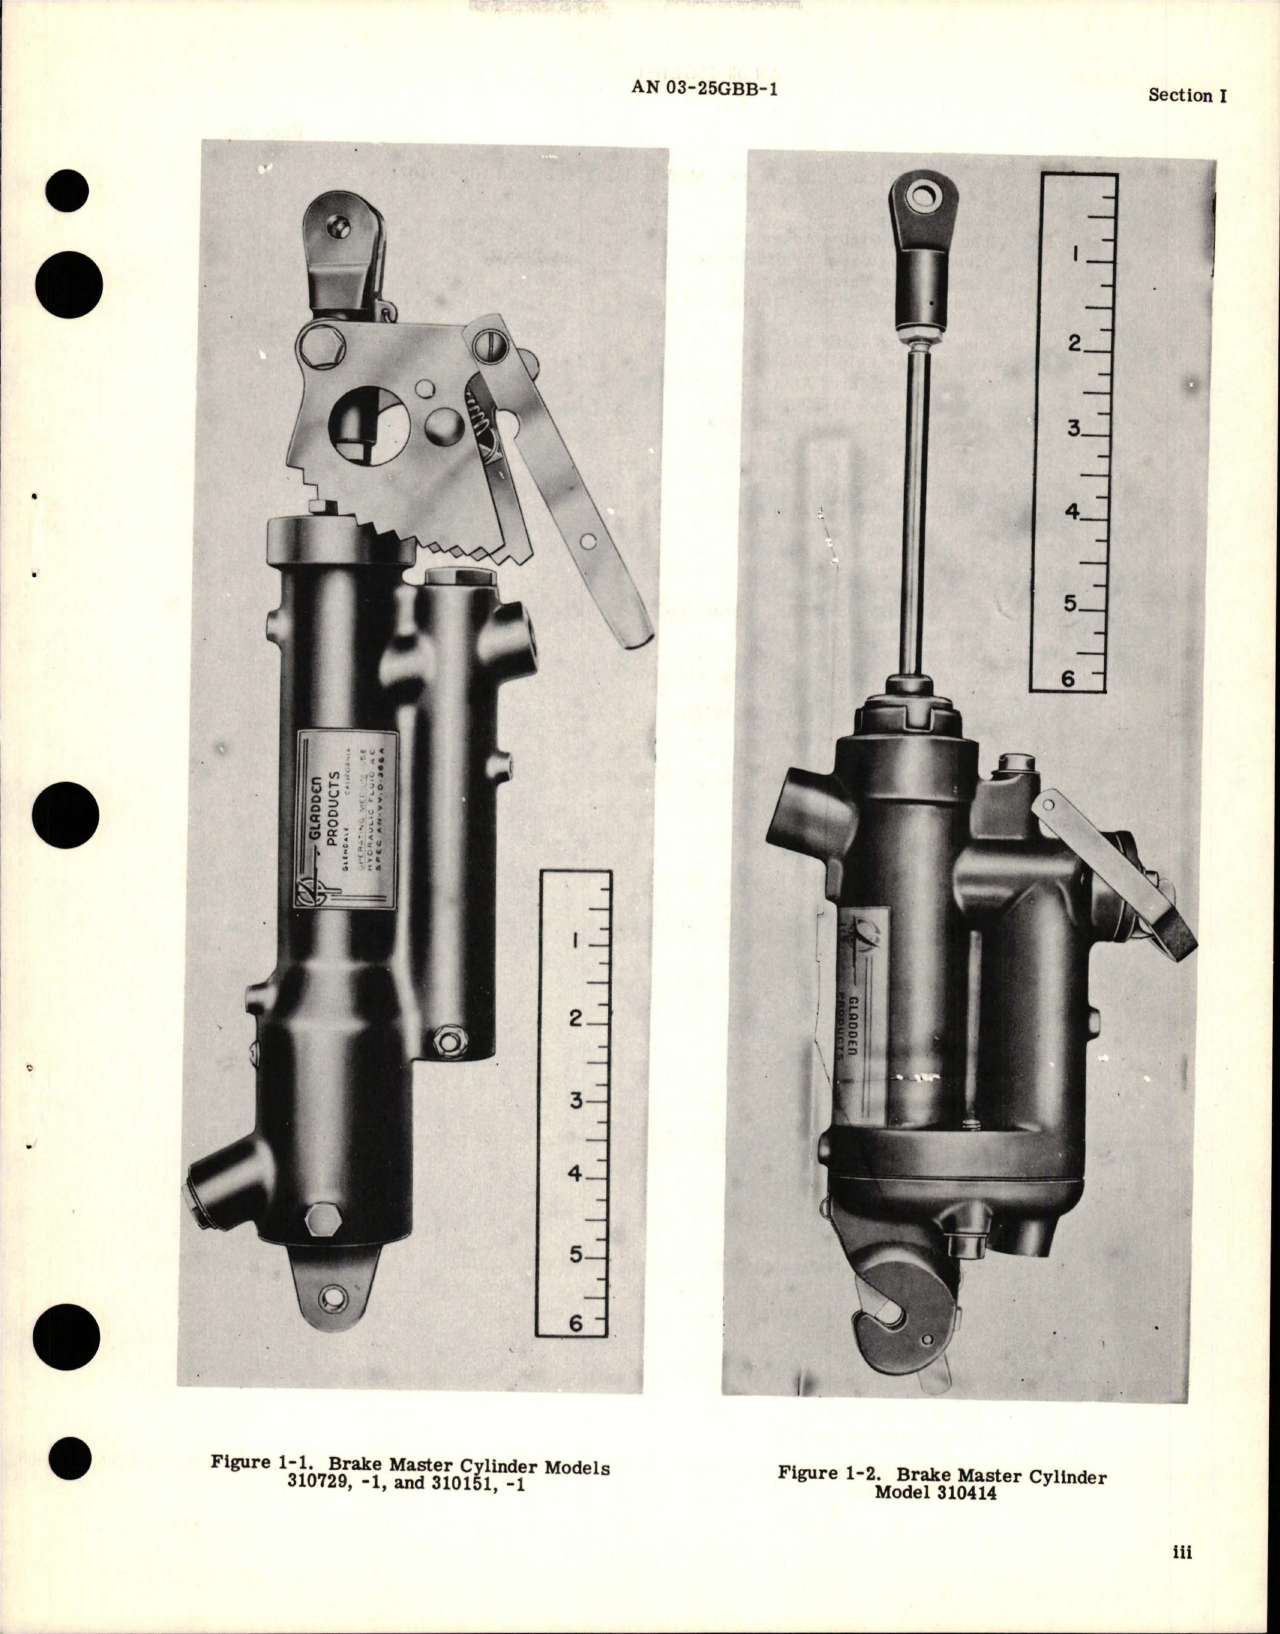 Sample page 5 from AirCorps Library document: Overhaul Instructions for Master Brake Cylinders and Parking Lock